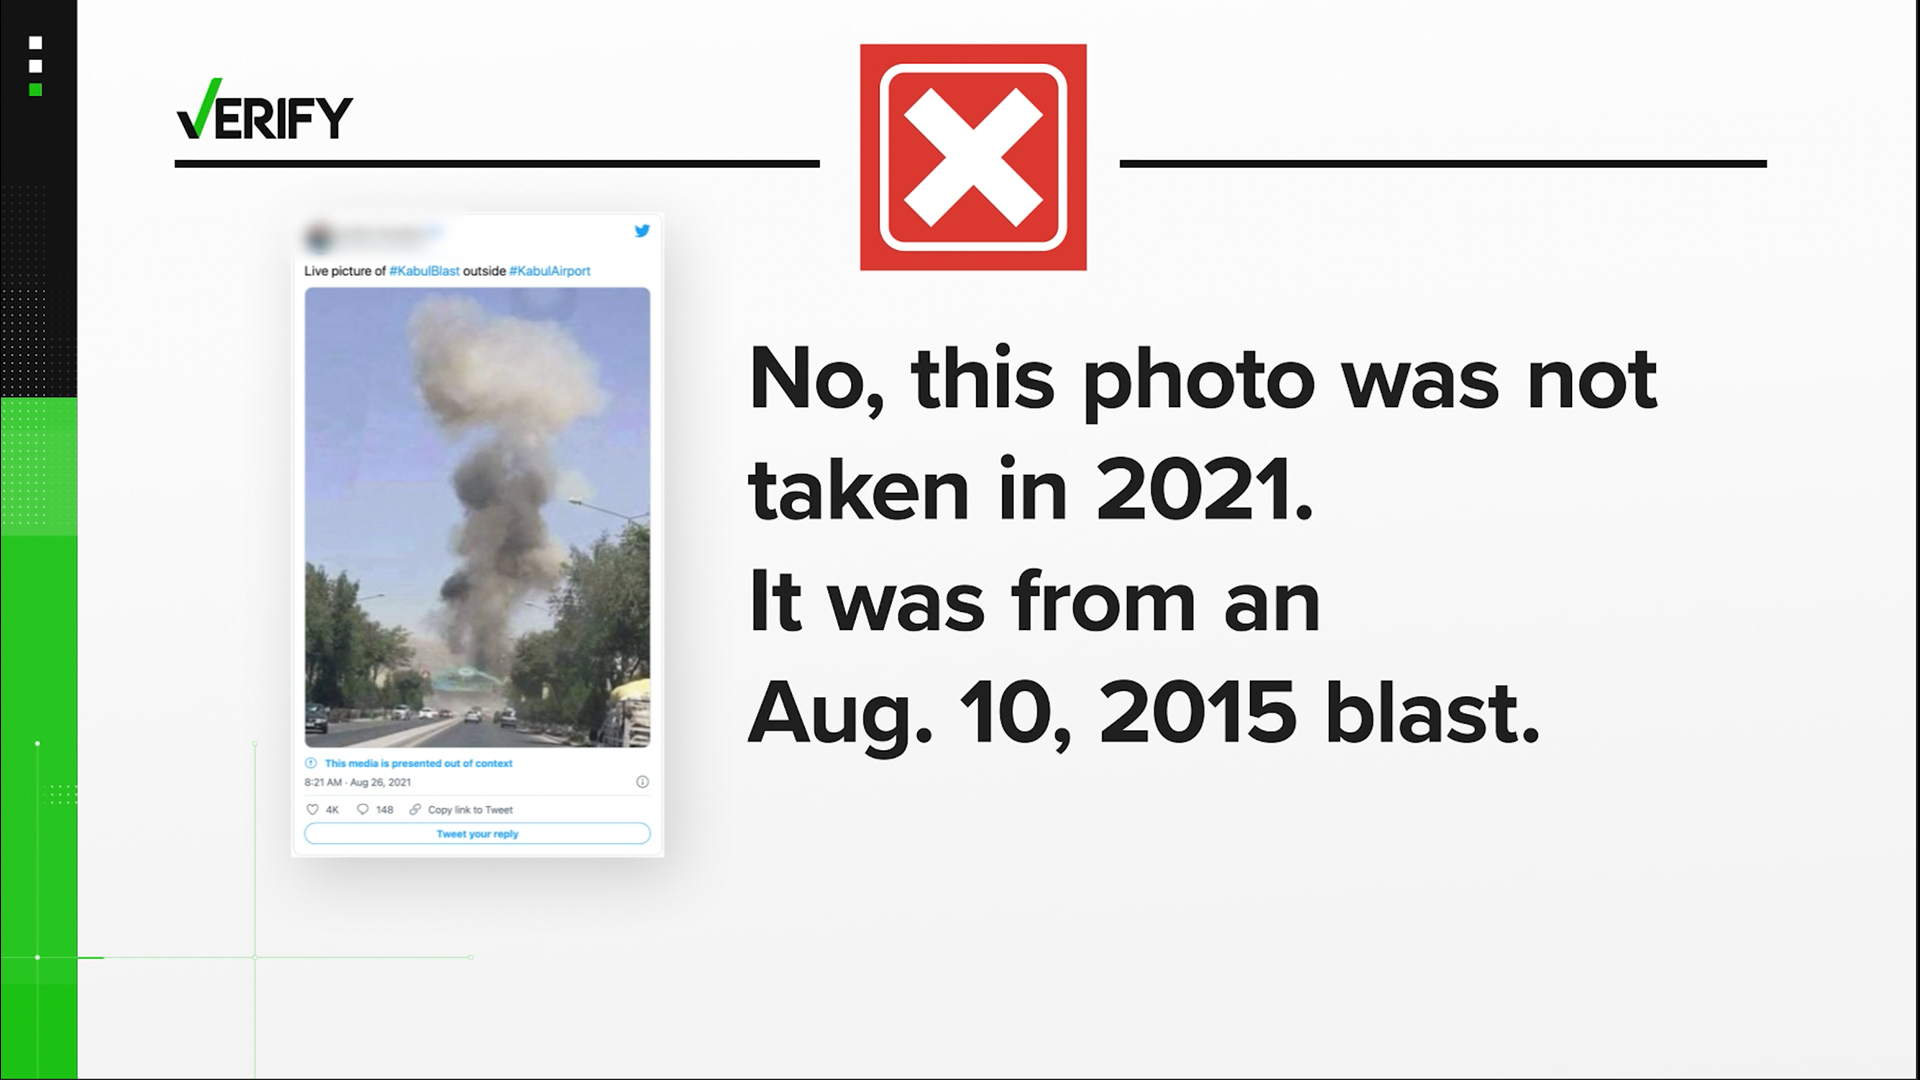 As part of VERIFY’s continued coverage of the Taliban takeover in Afghanistan, we researched additional images and videos claiming to be from the airport explosion.